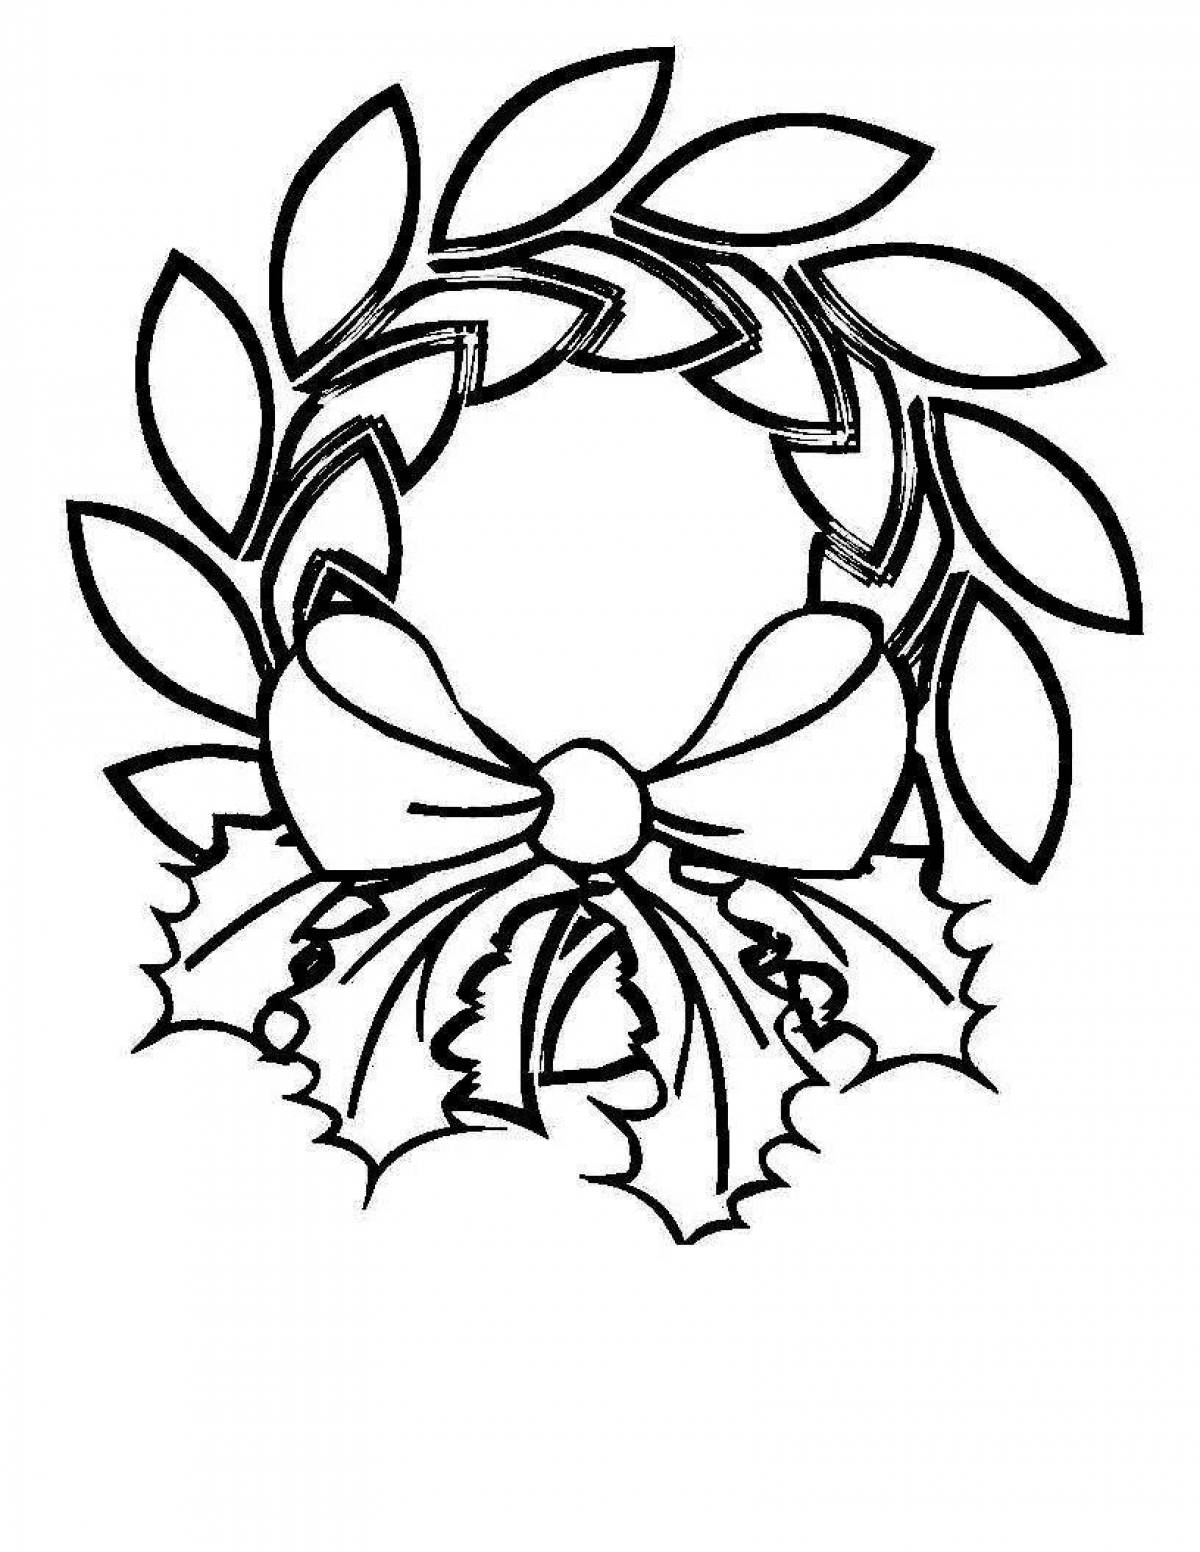 Exquisite Christmas wreath coloring book for kids